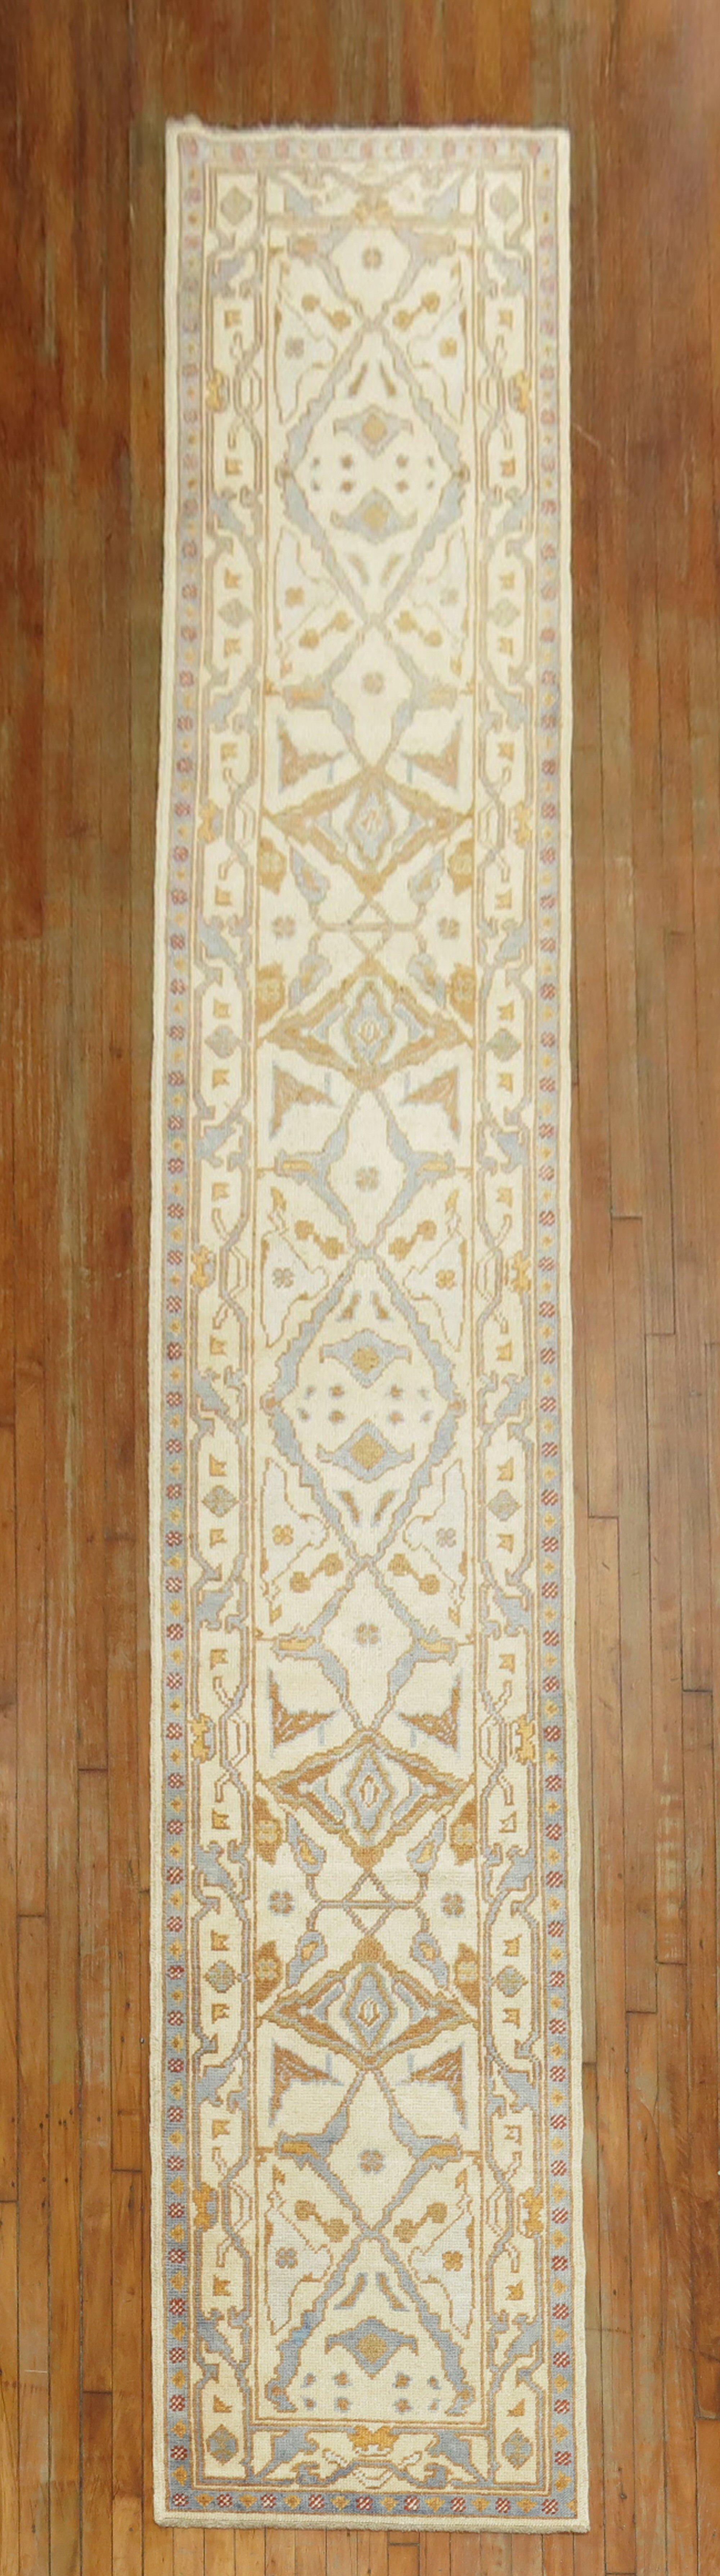 One of a kind early 21st century Turkish Oushak narrow and long Reproduction Runner.

Measures: 2.8'' x 16.8''.